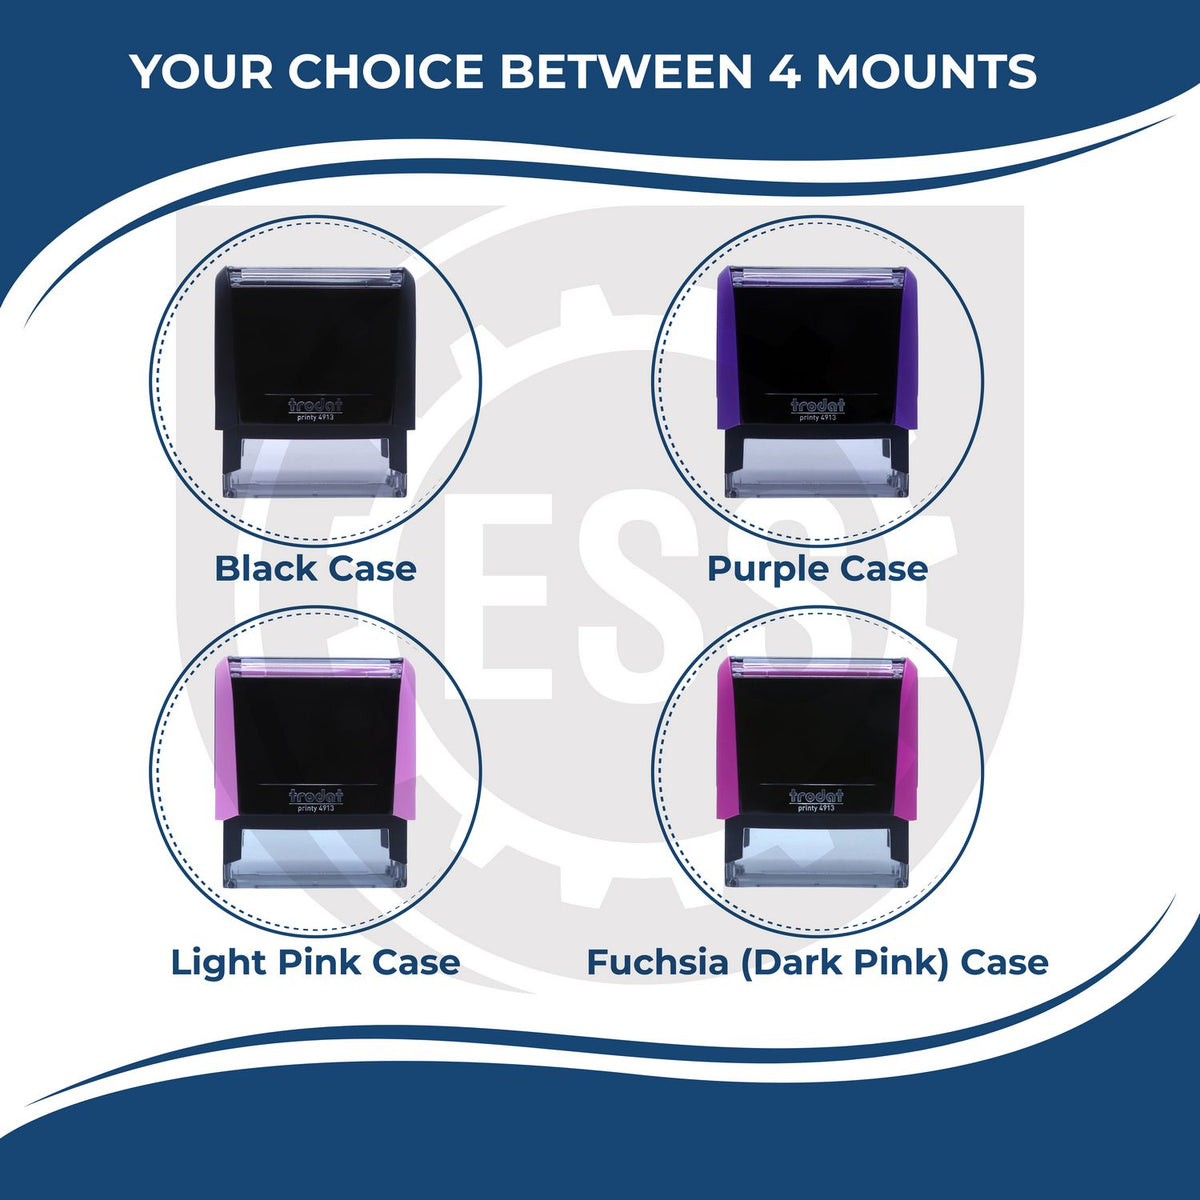 A picture of different colored mounts for the Self-Inking State Seal Texas Notary Stamp featurning a Red, Blue or Black Mount